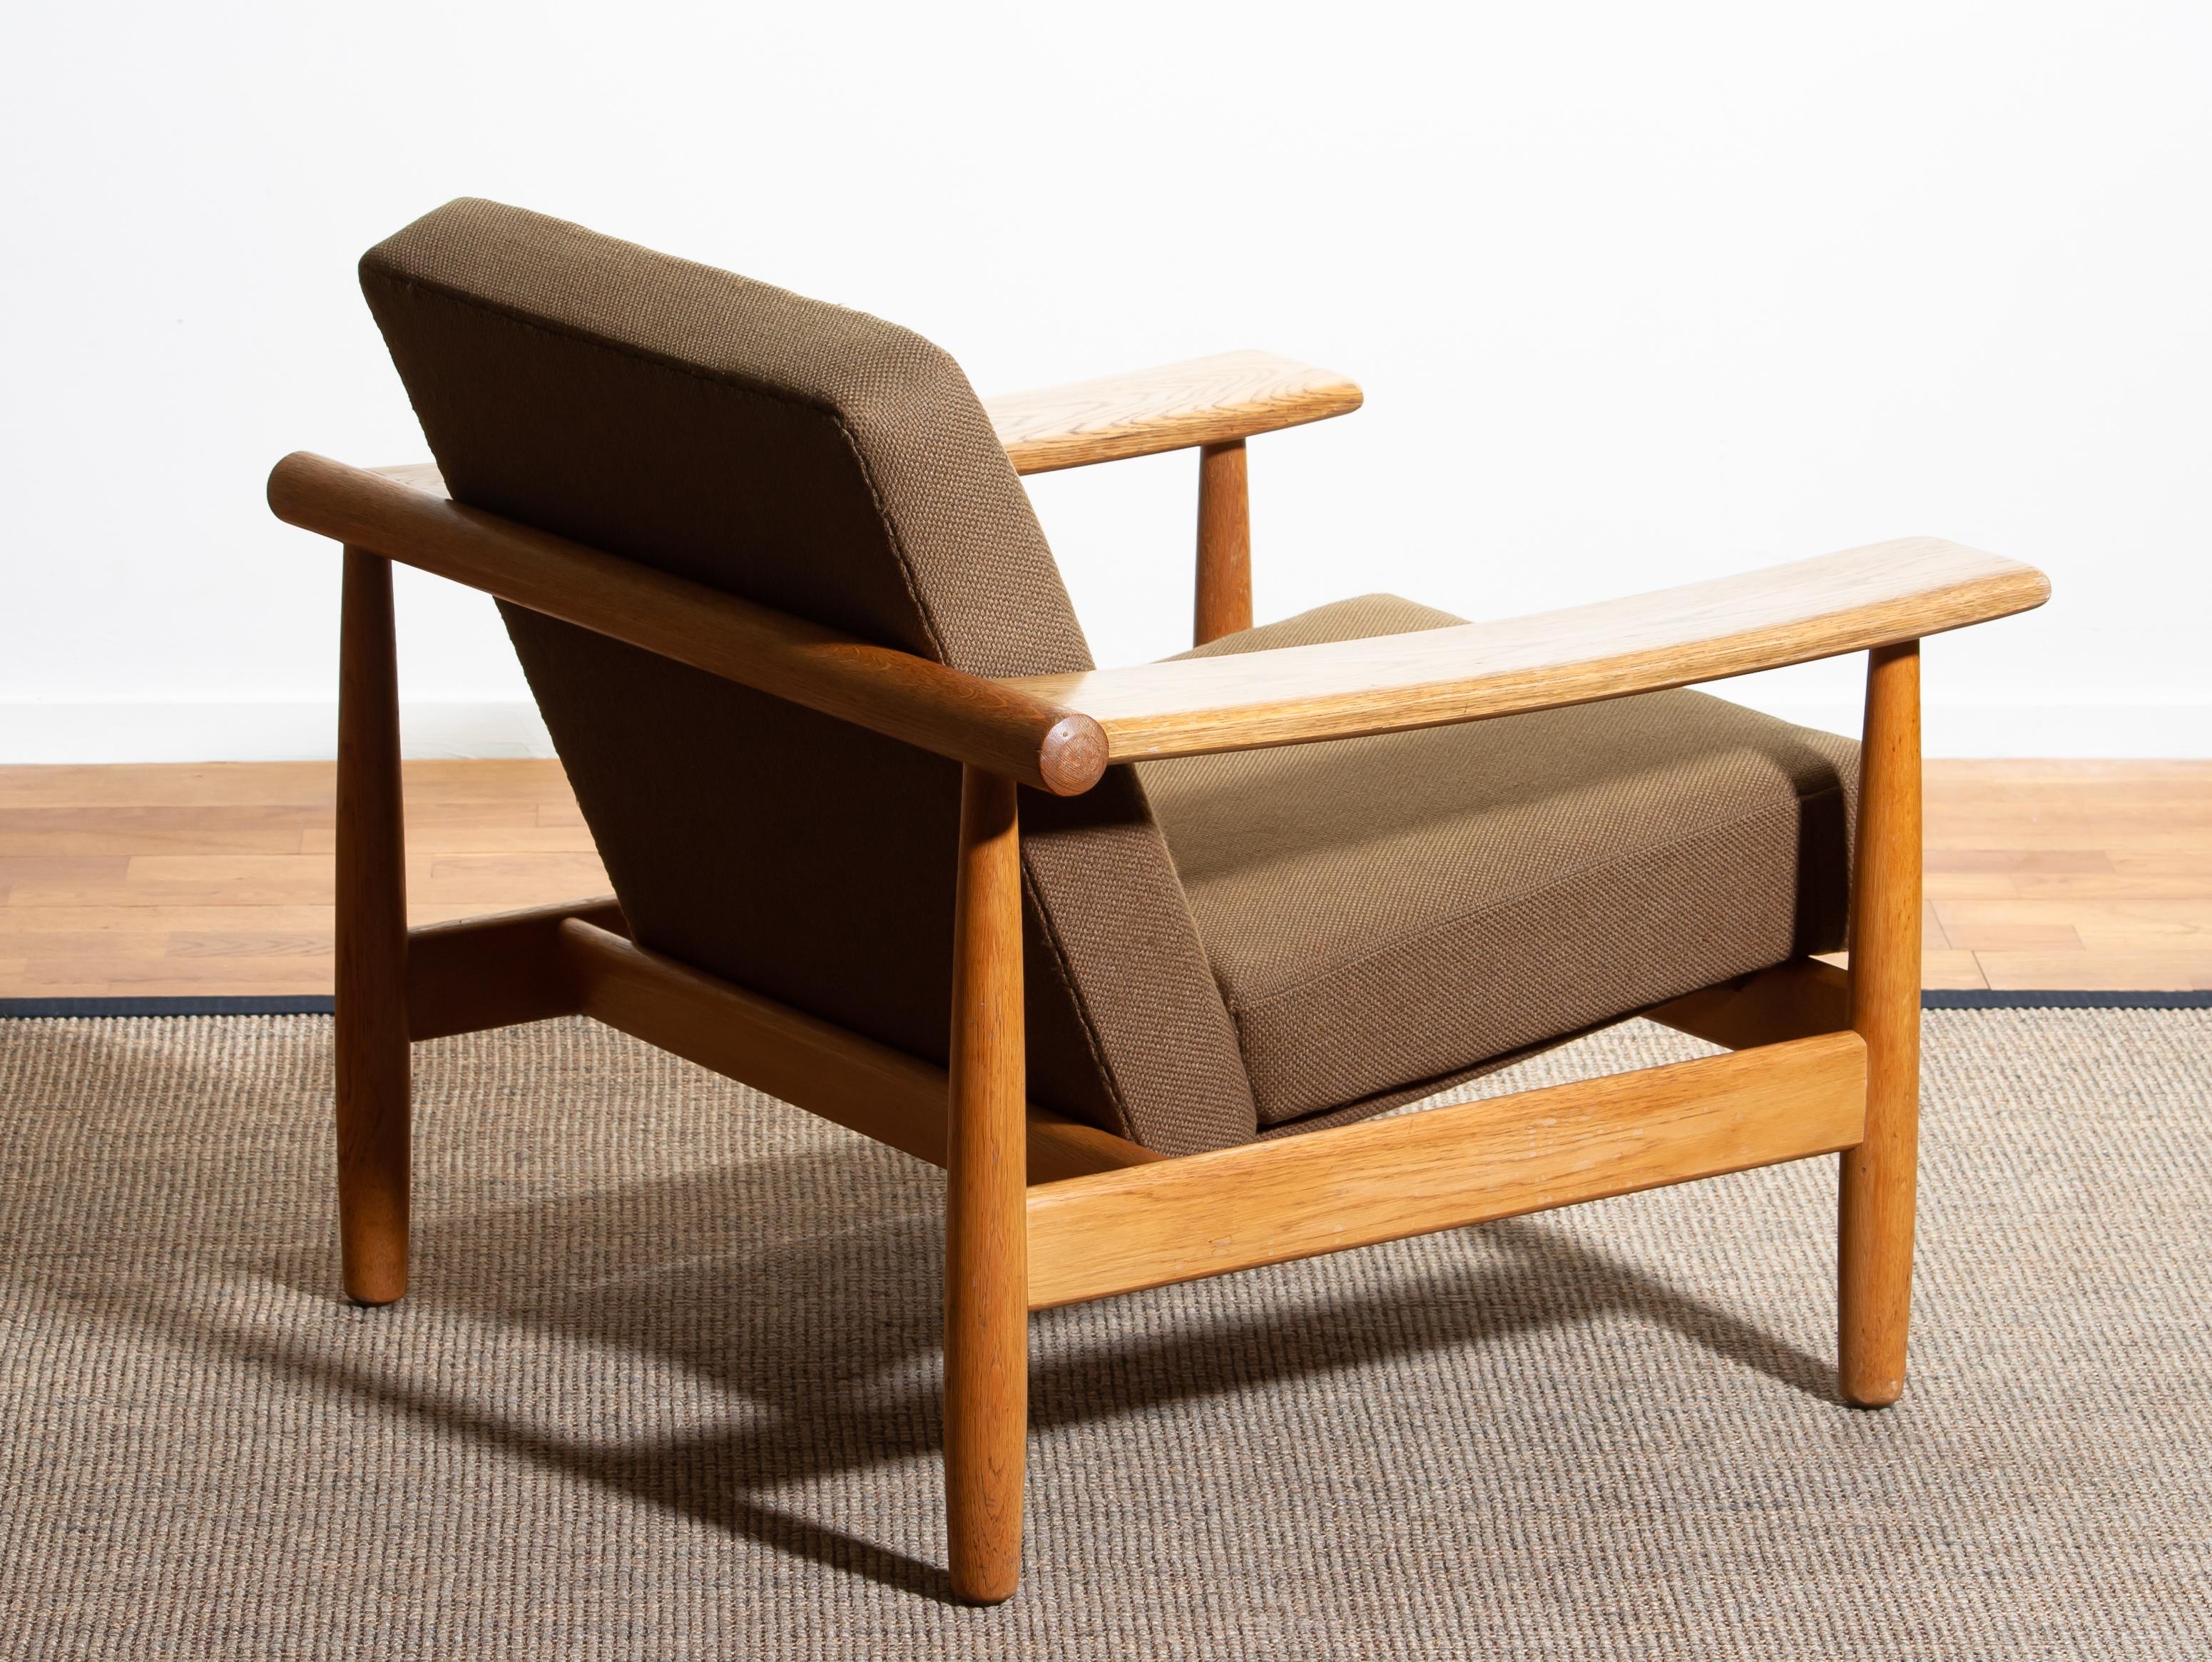 1960s, Oak Sofa and Lounge Chair/Living Room Set from Denmark in GETAMA Style 1